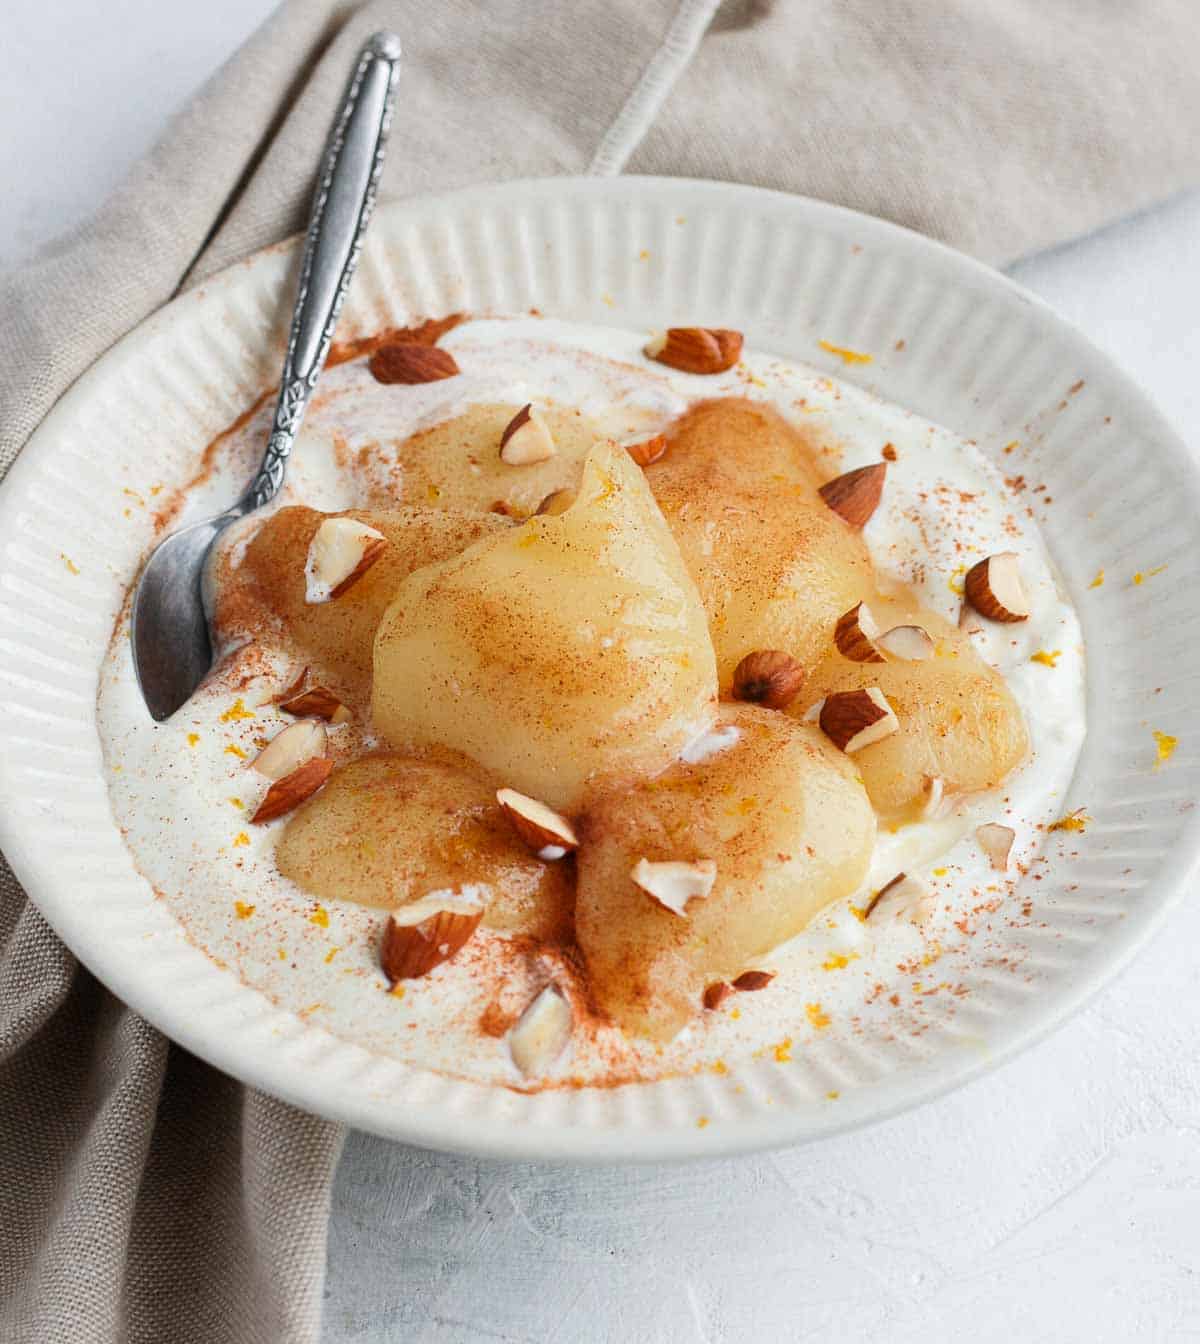 Poached pears over yogurt in a white bowl.